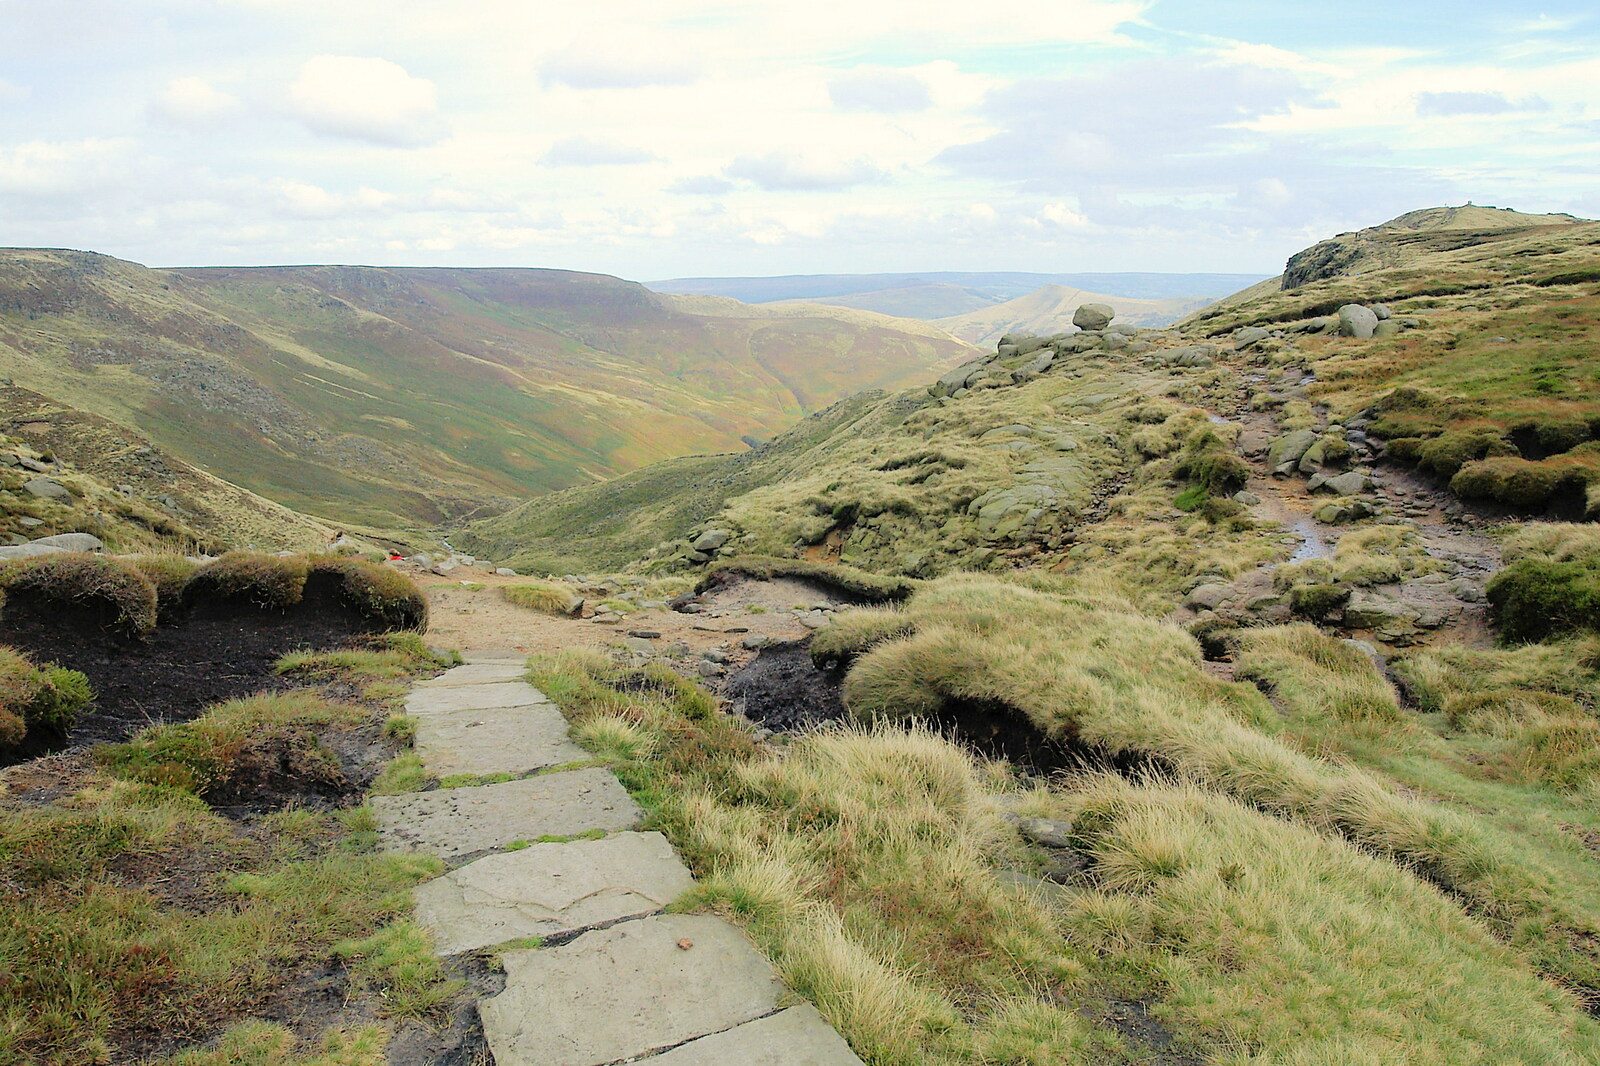 A flag-stone path from The Pennine Way: Lost on Kinder Scout, Derbyshire - 9th October 2005